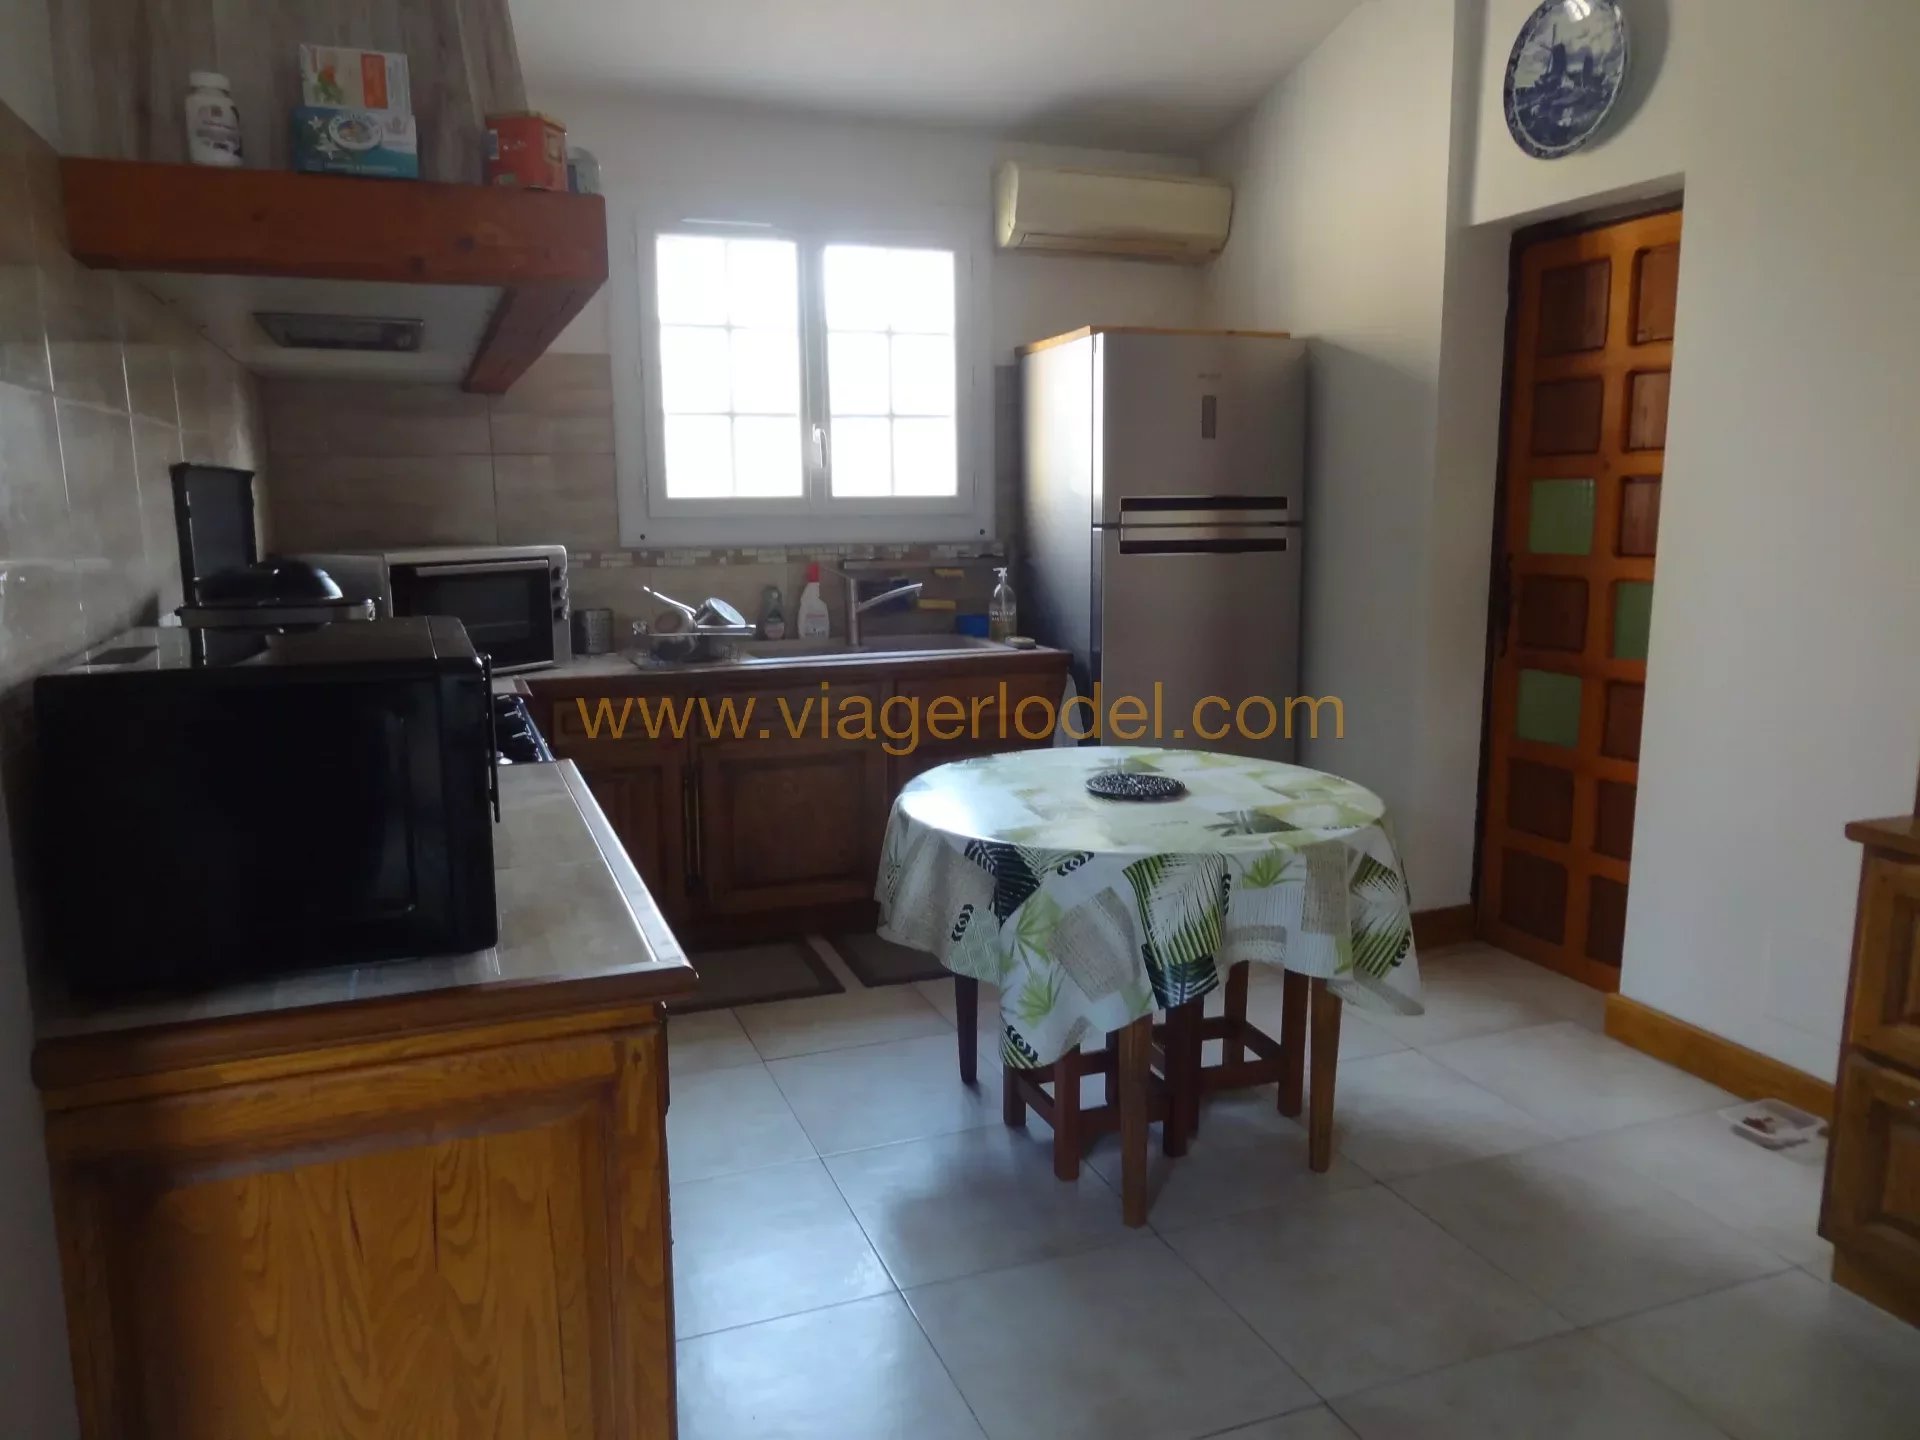 Ref. 9094 - BARE OWNERSHIP - Occupied house